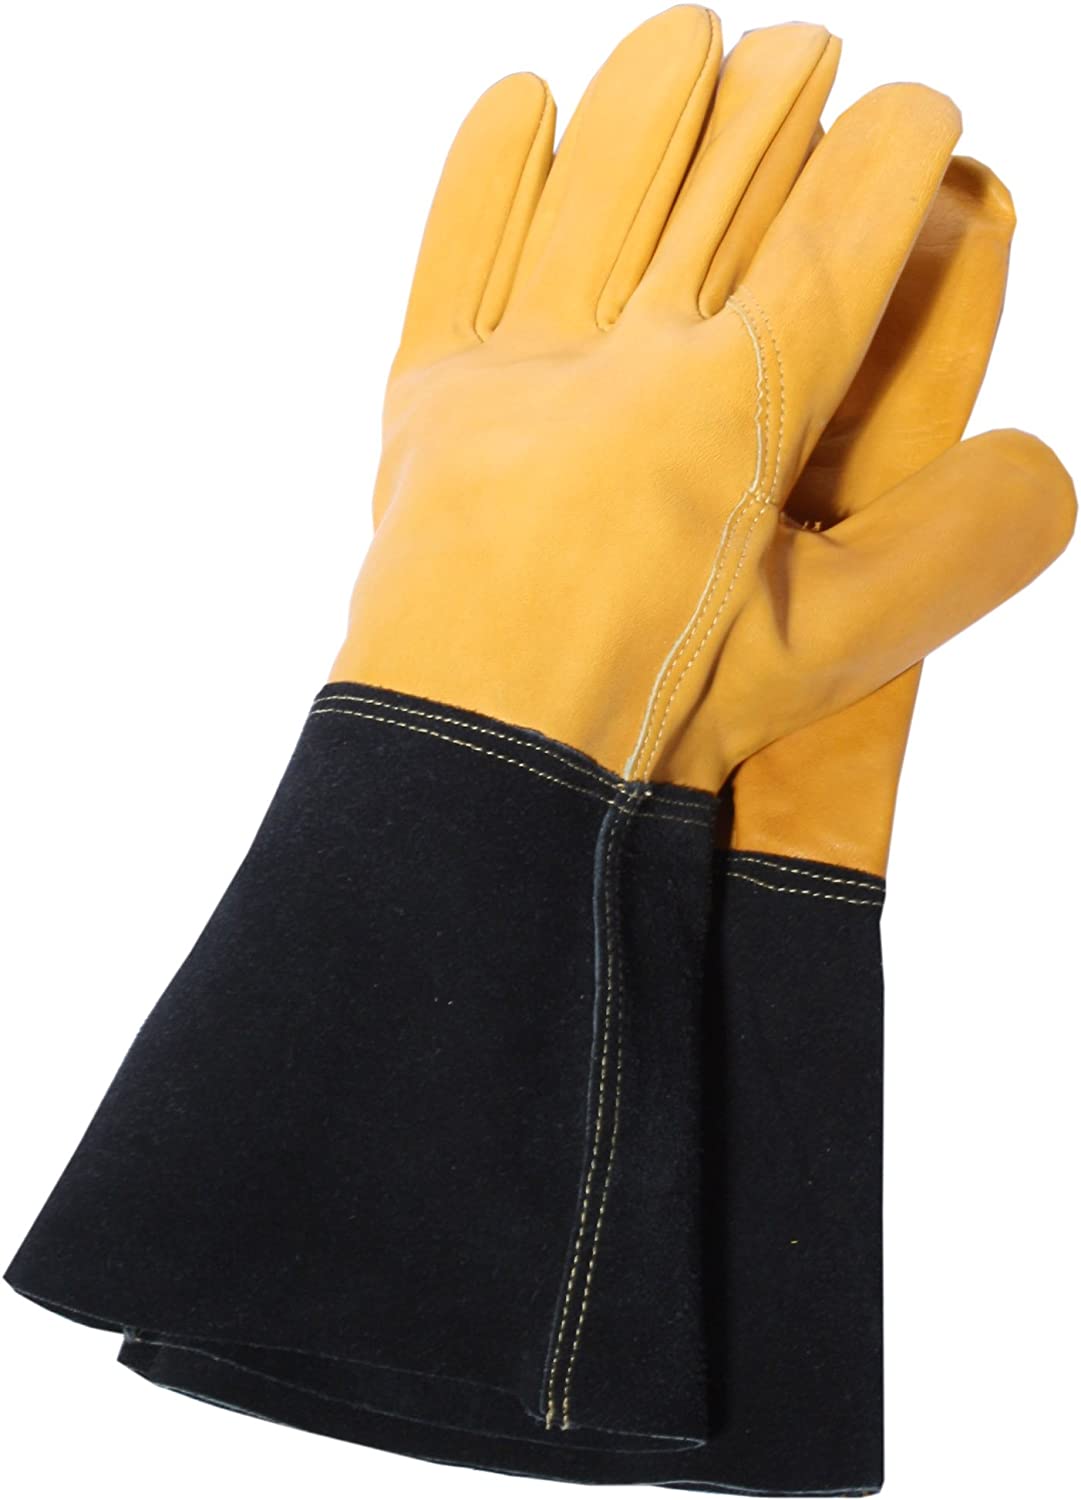 Image of Town & Country Deluxe Premium Leather Gauntlet Gloves Medium